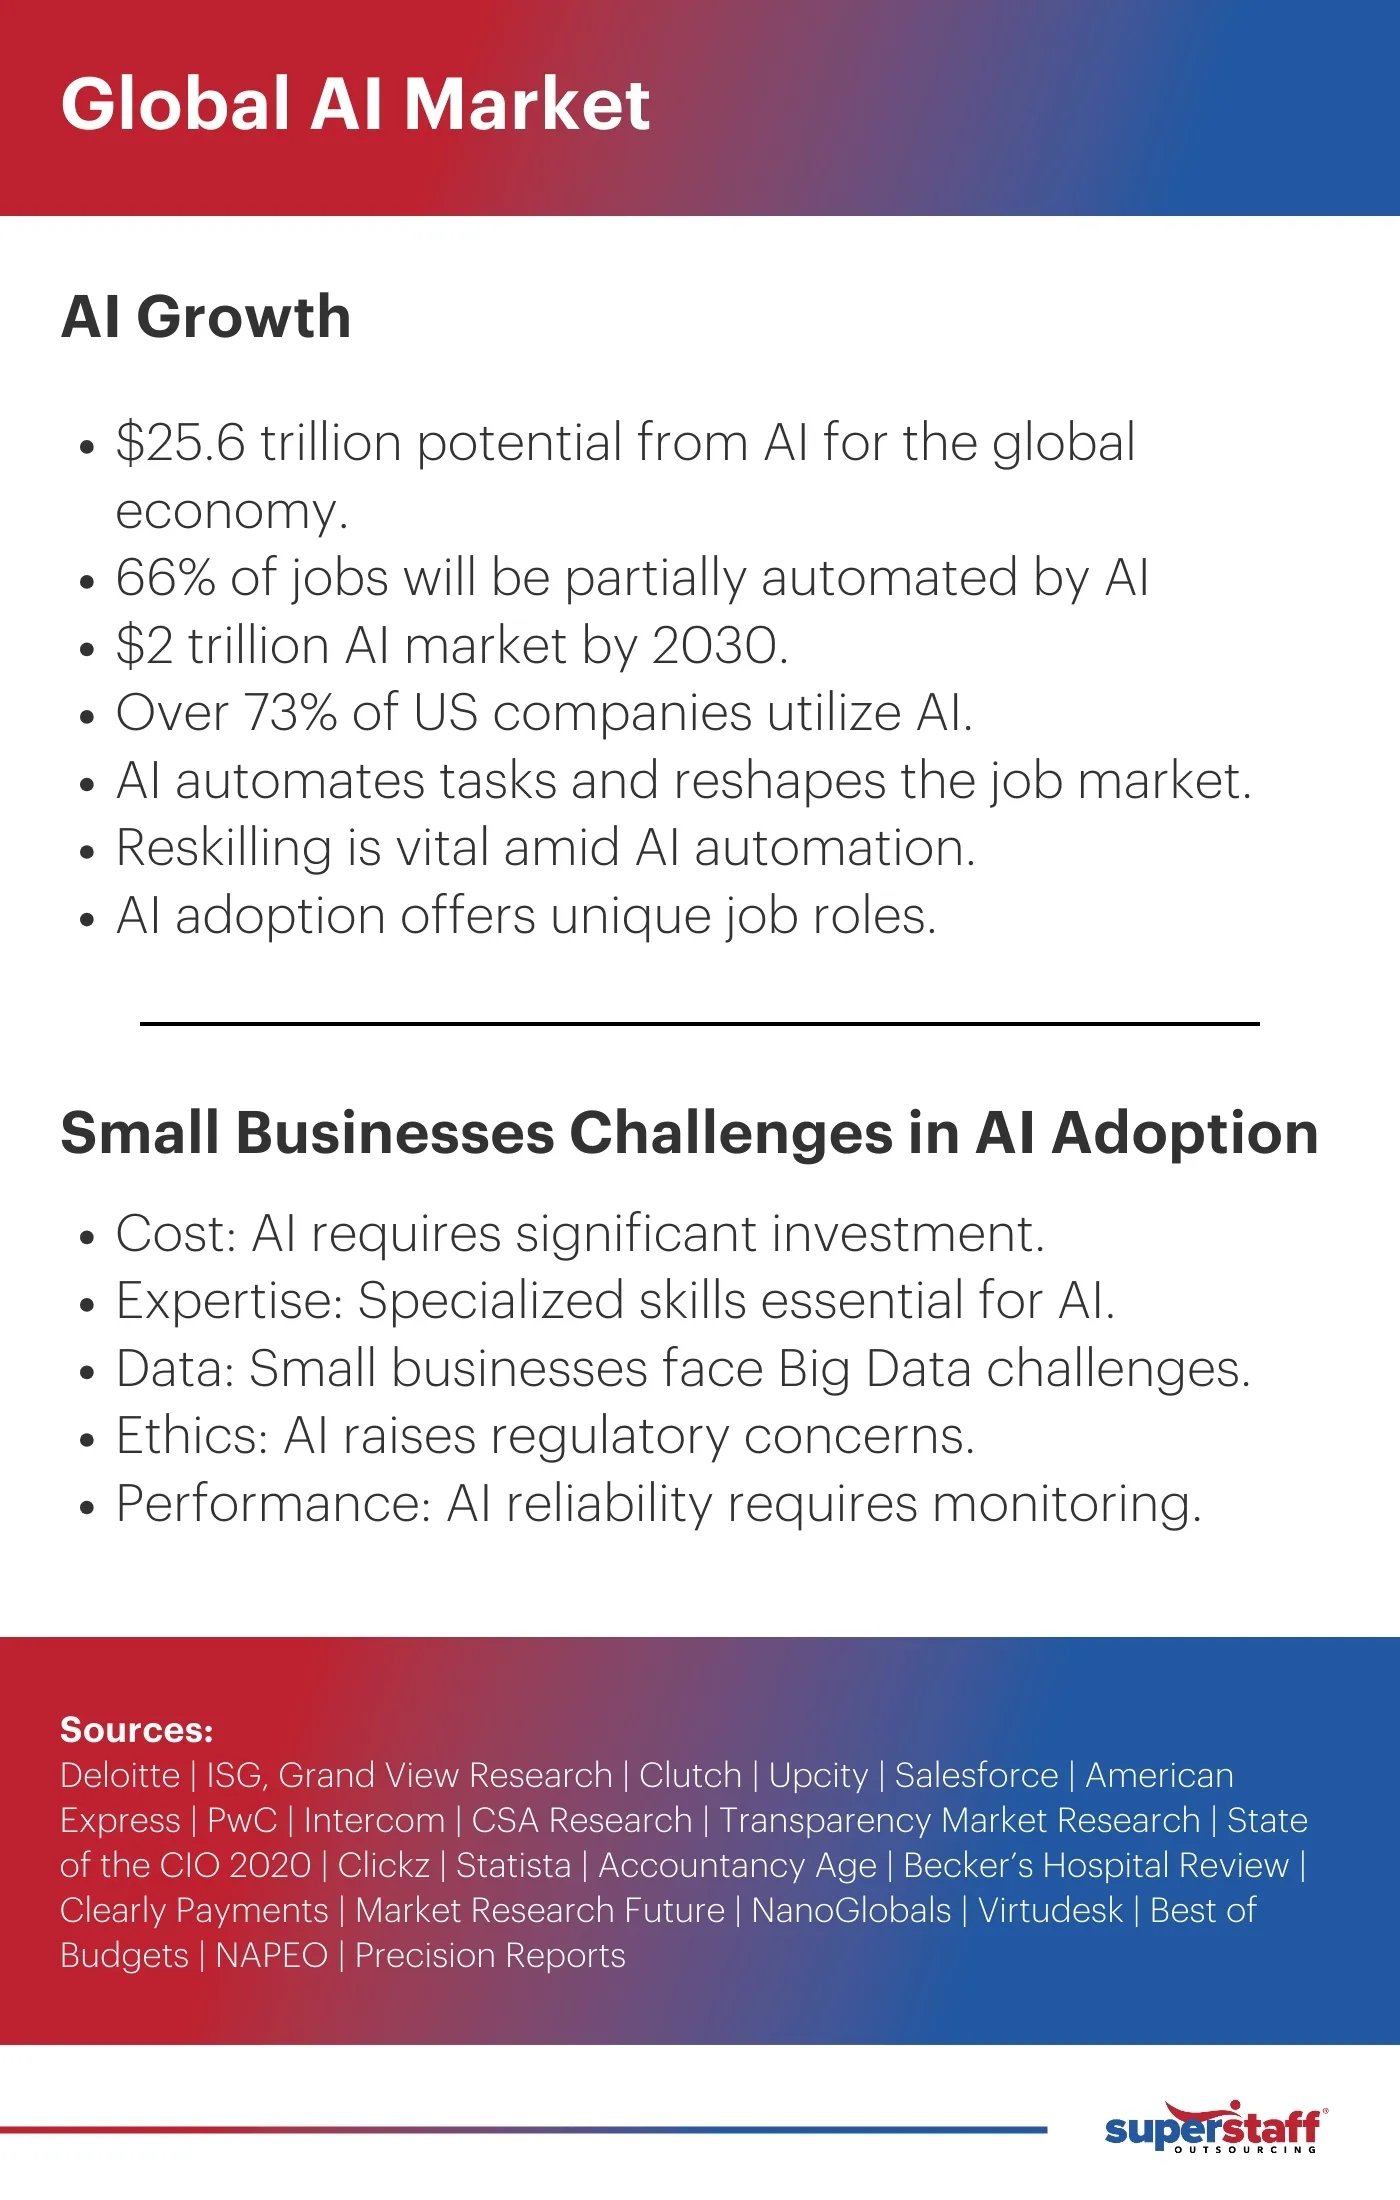 An infographic shows AI adoption challenges as compared to challenges posed by Outsourcing Services for Small Businesses.